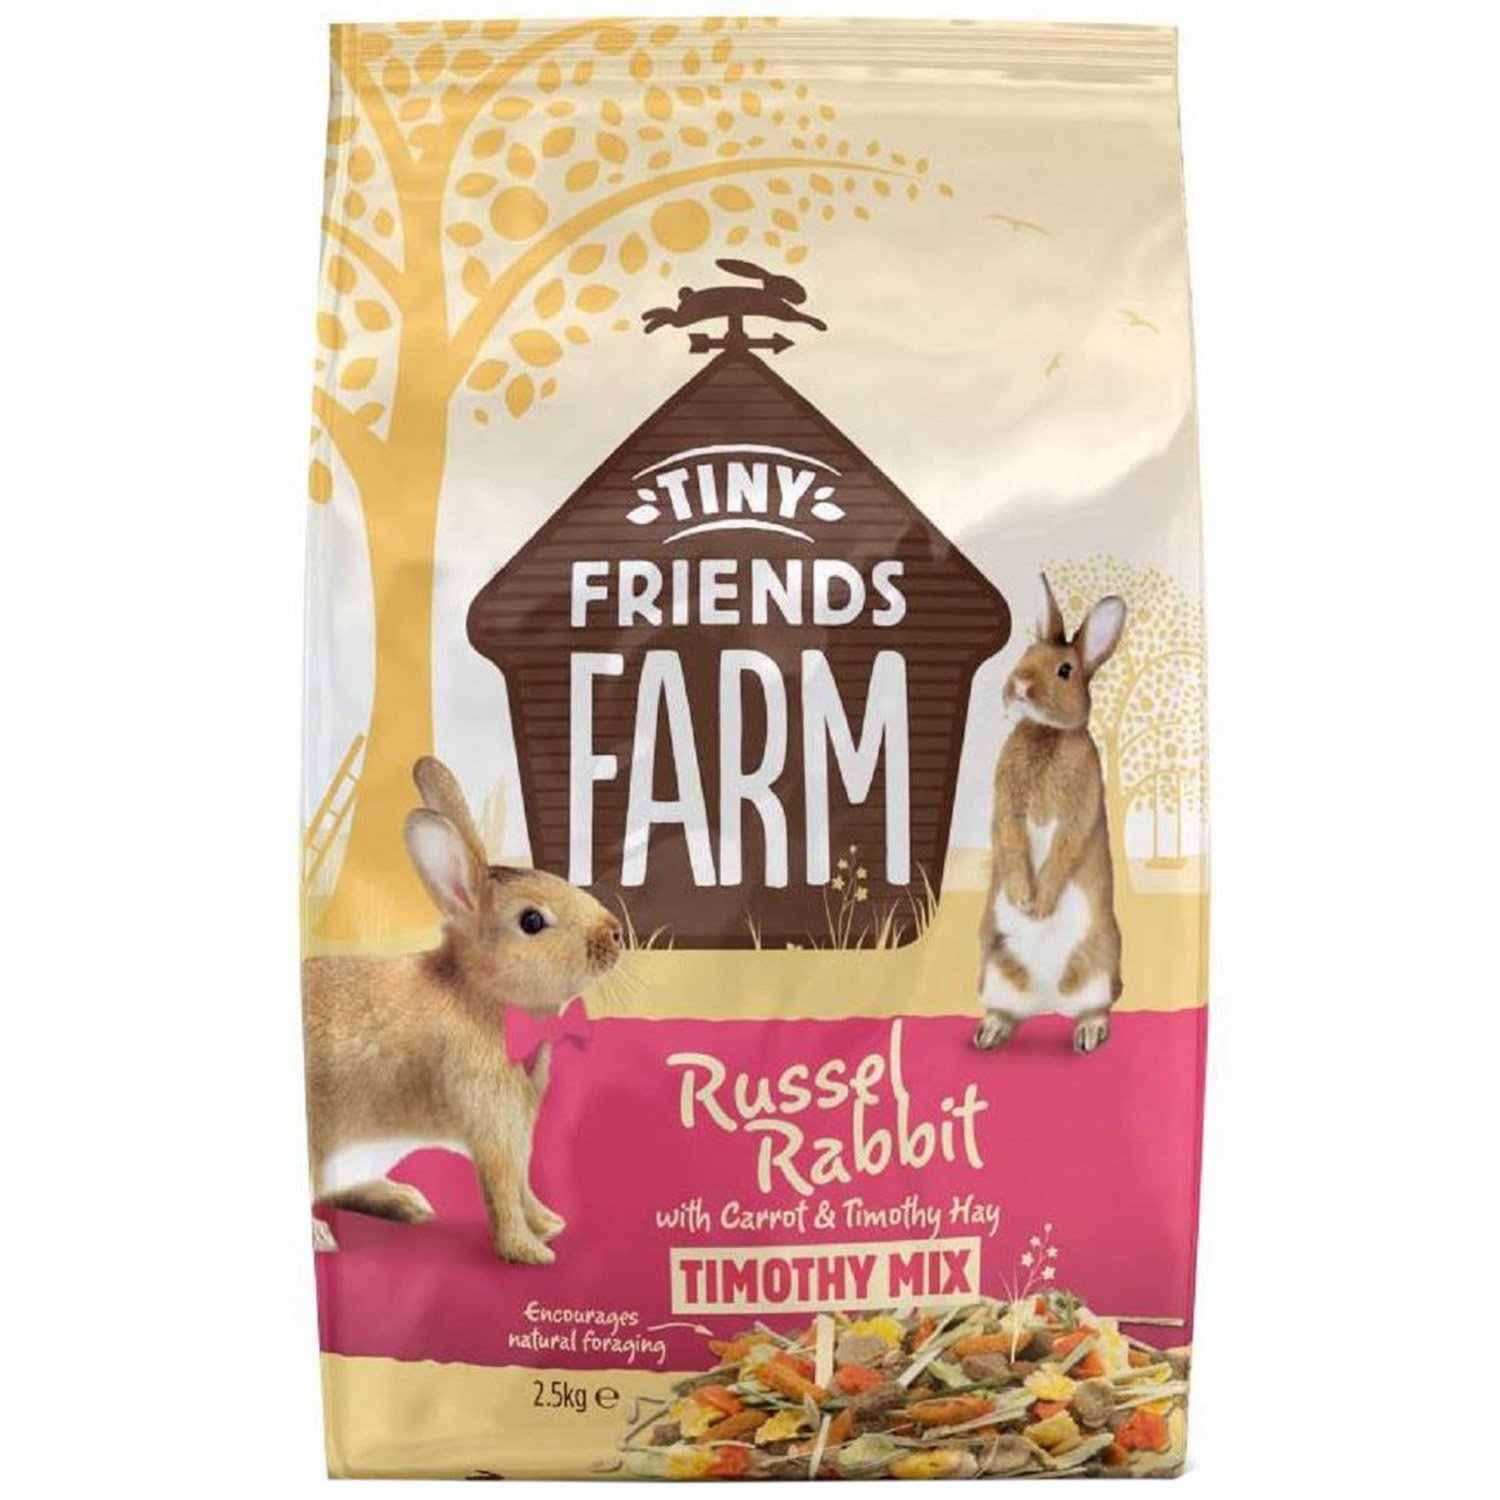 Tiny Friends Russel Rabbit Carrot and Hay Food 2.5kg Image